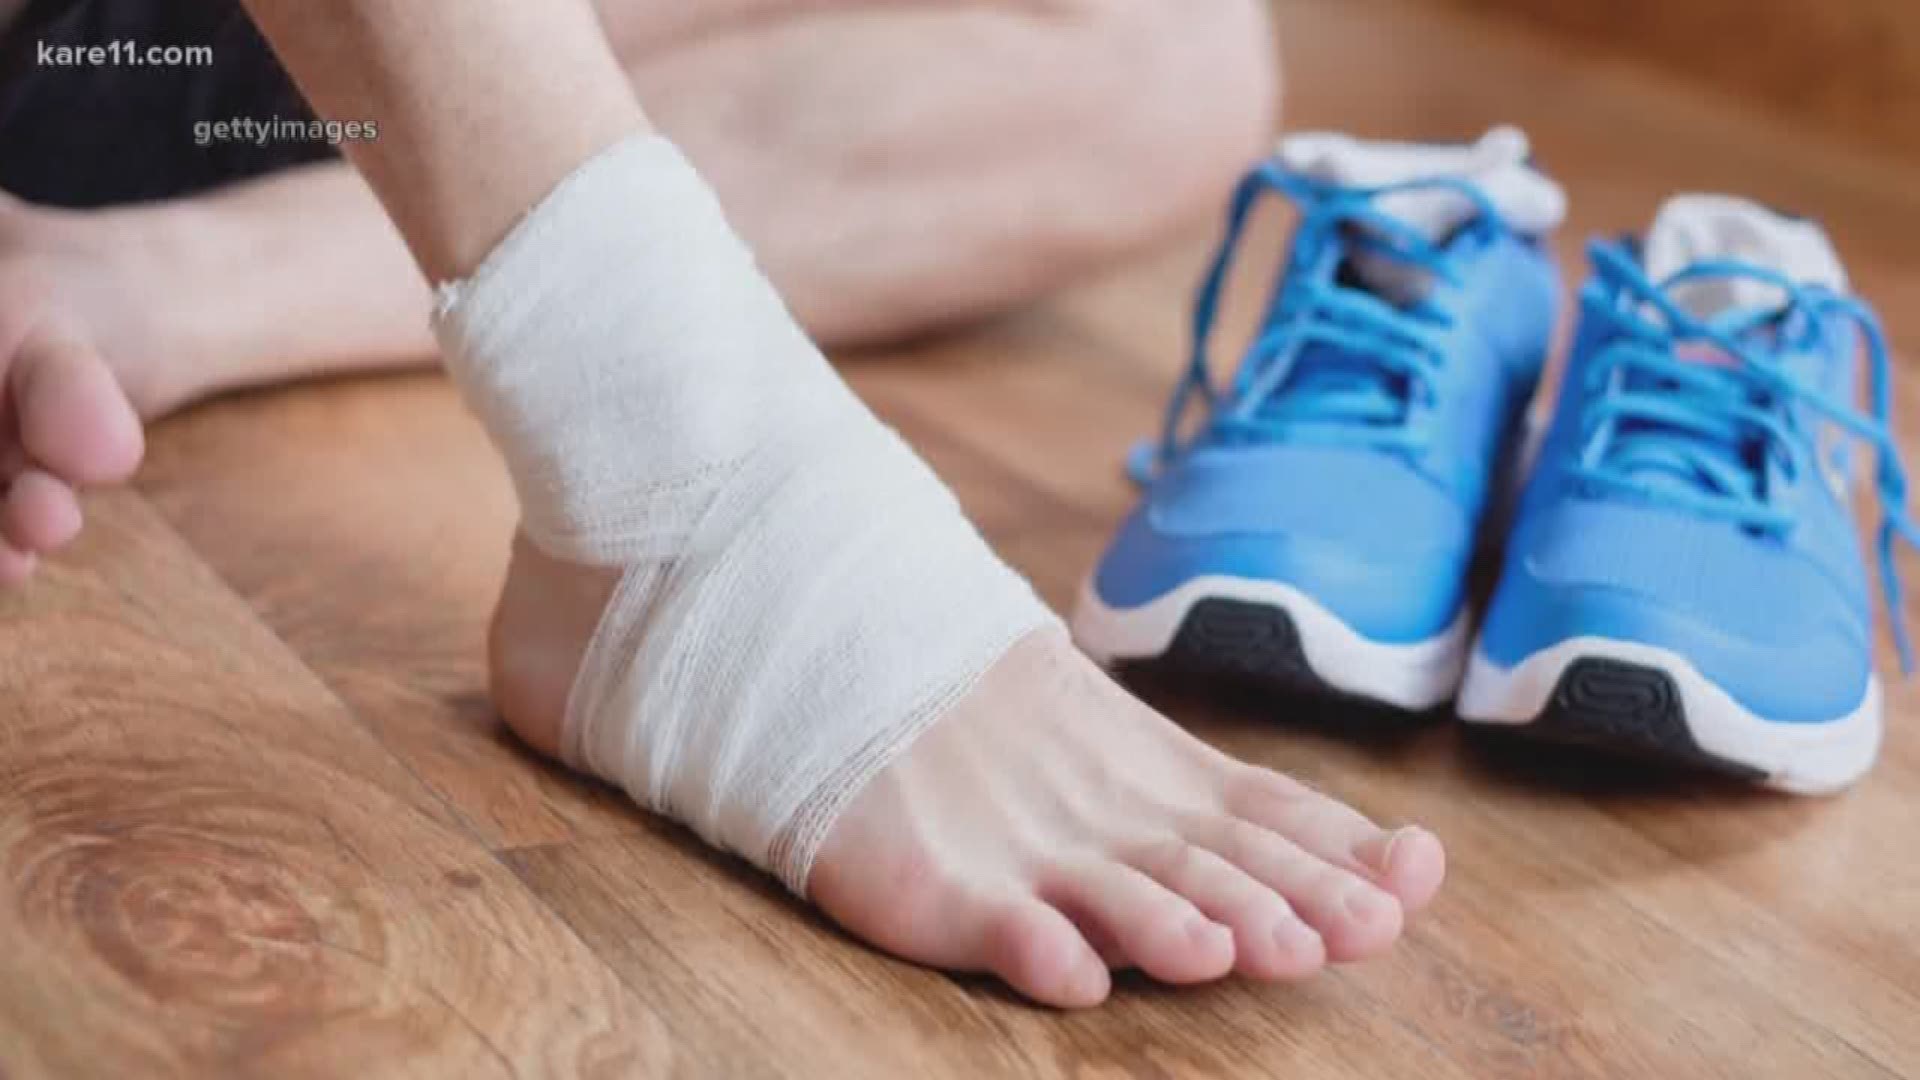 Even the most dedicated and in-shape athletes will suffer a strain or sprain every once in a while. The question is, what's the difference, and how do you treat them?